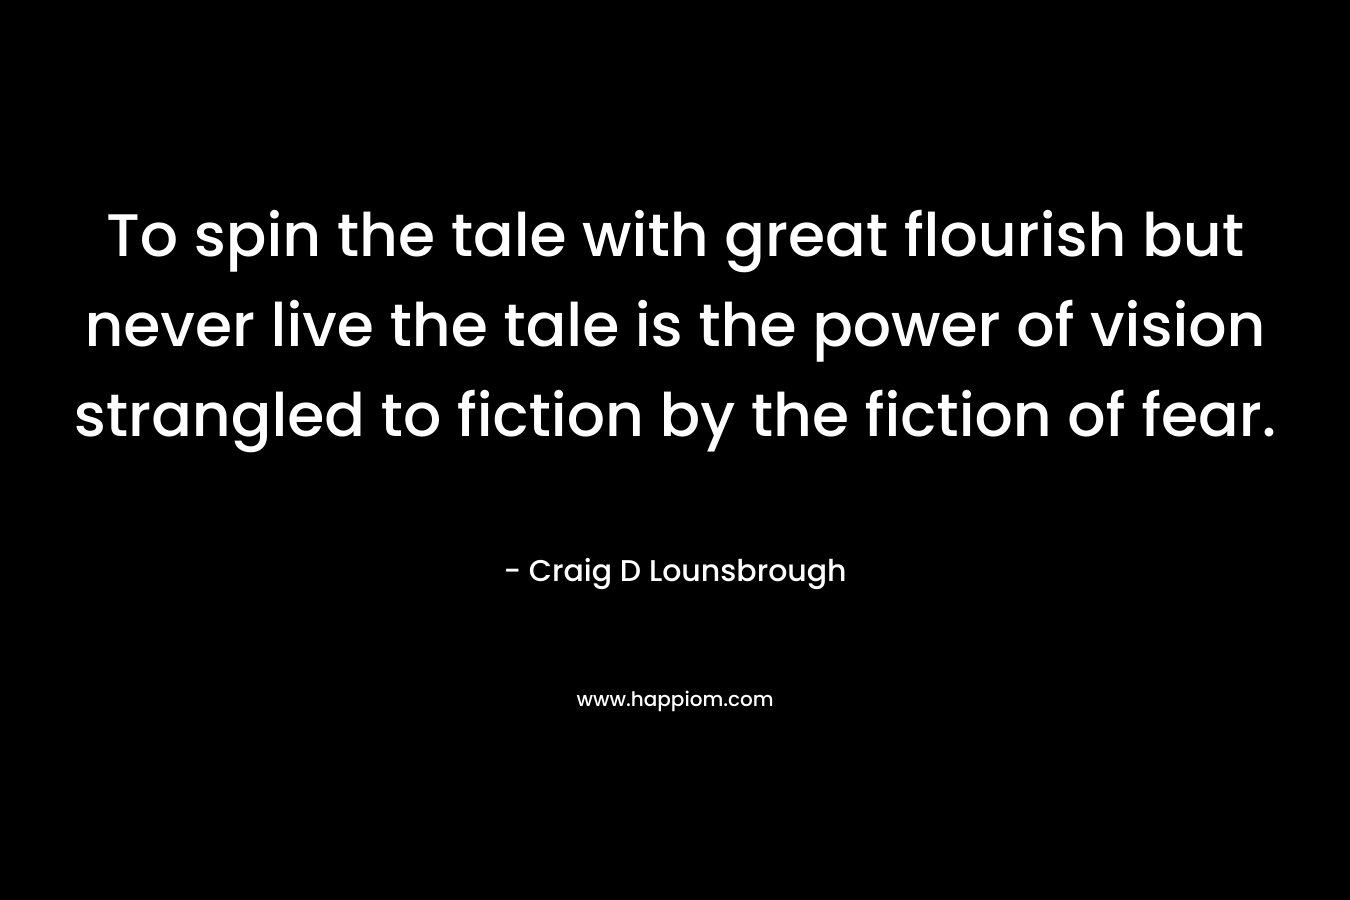 To spin the tale with great flourish but never live the tale is the power of vision strangled to fiction by the fiction of fear. – Craig D Lounsbrough